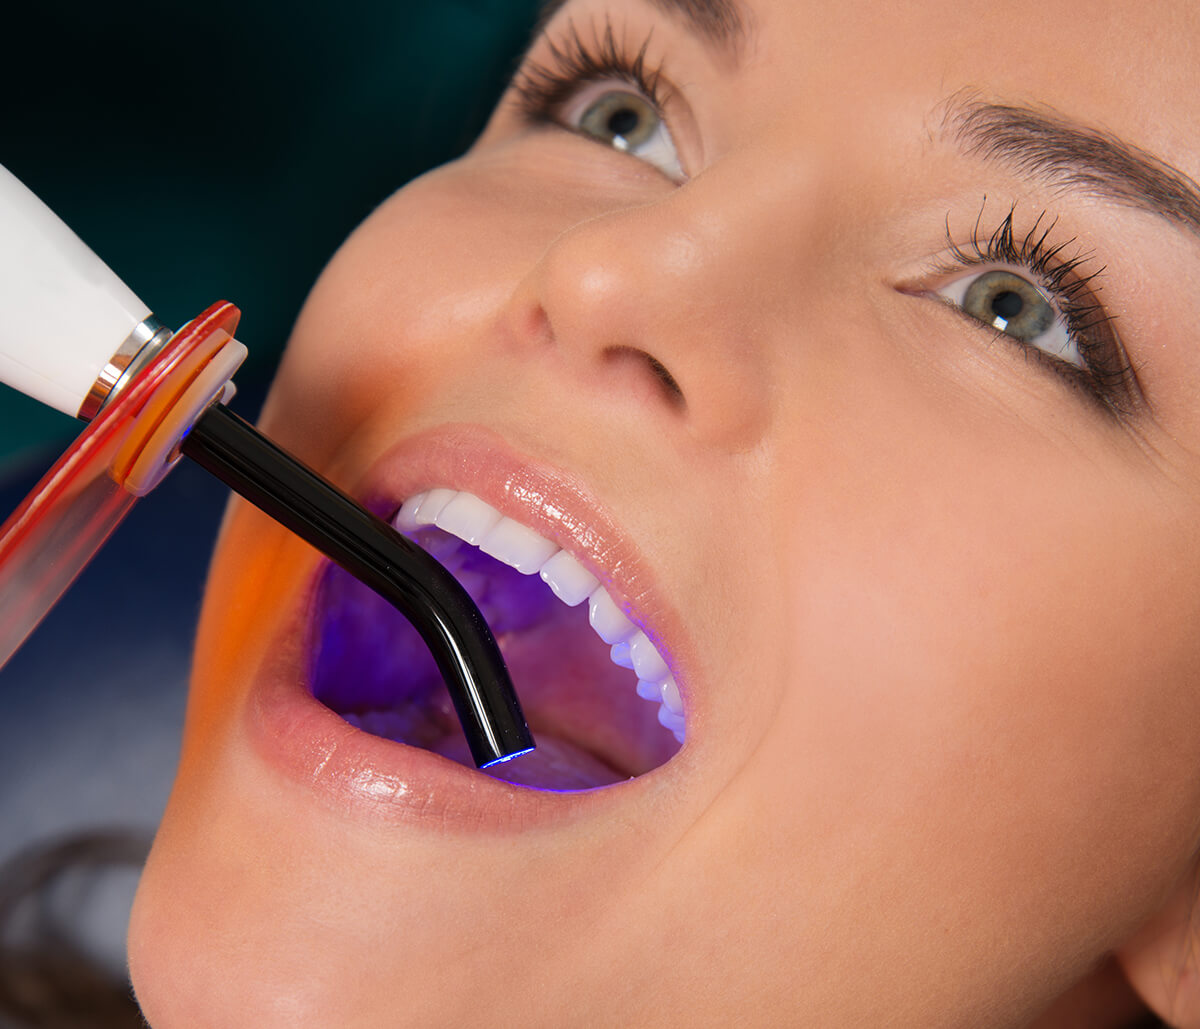 Laser Dentistry Services in Lauderdale FL Area